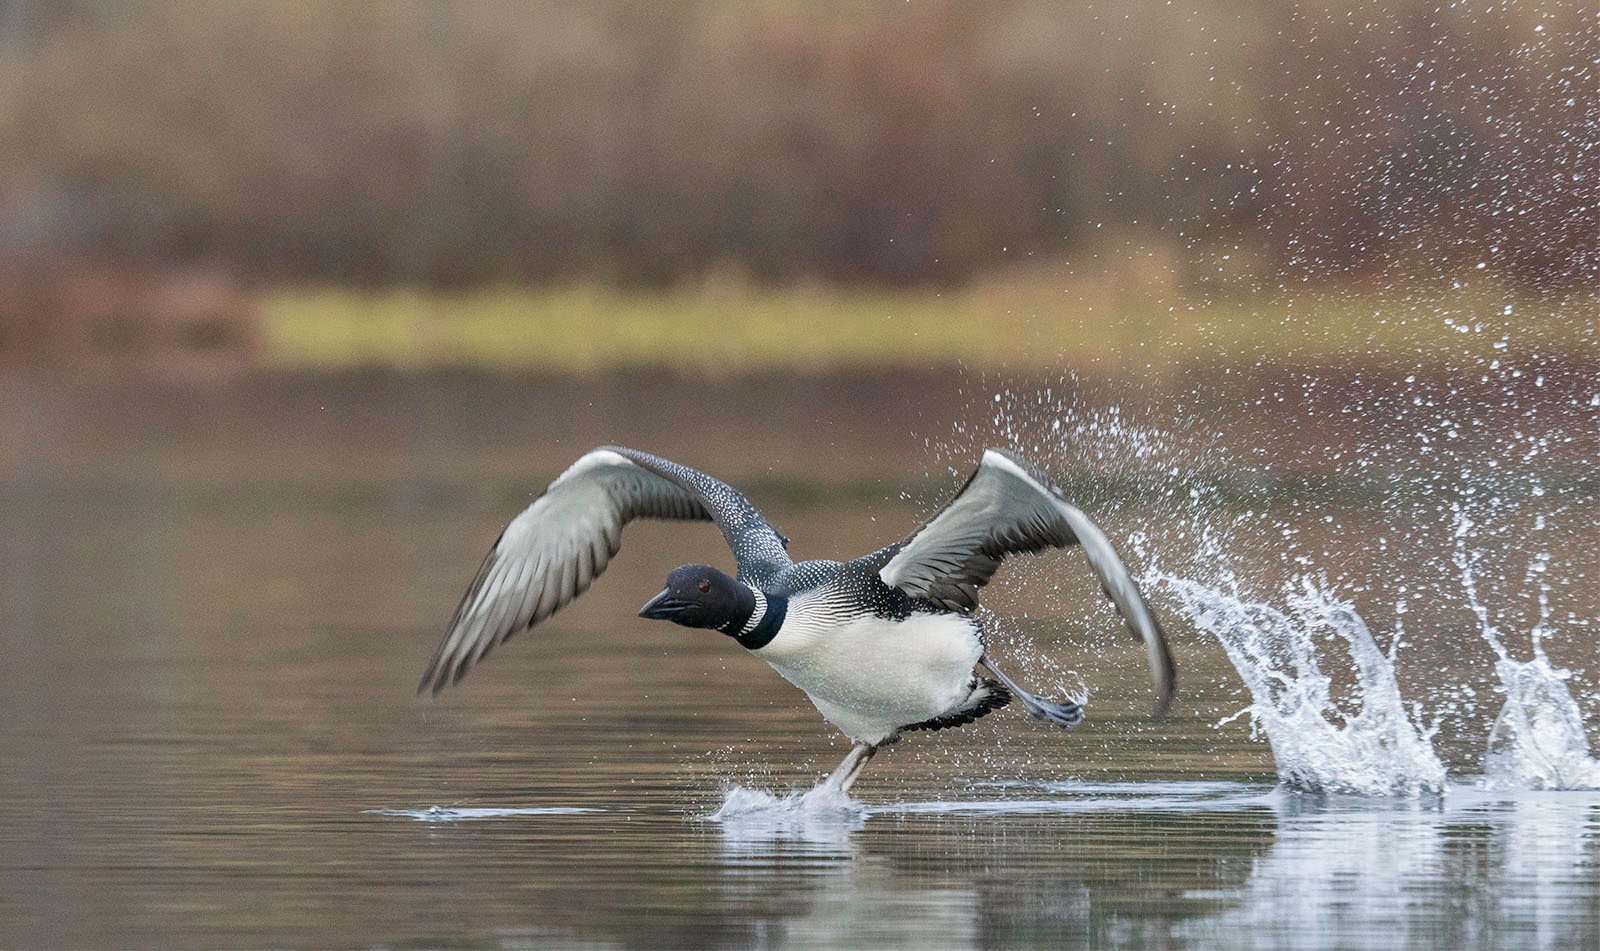 A loon with fully spread wings splashes as it takes off from a tranquil lake, water droplets flying around in a dynamic display of motion.